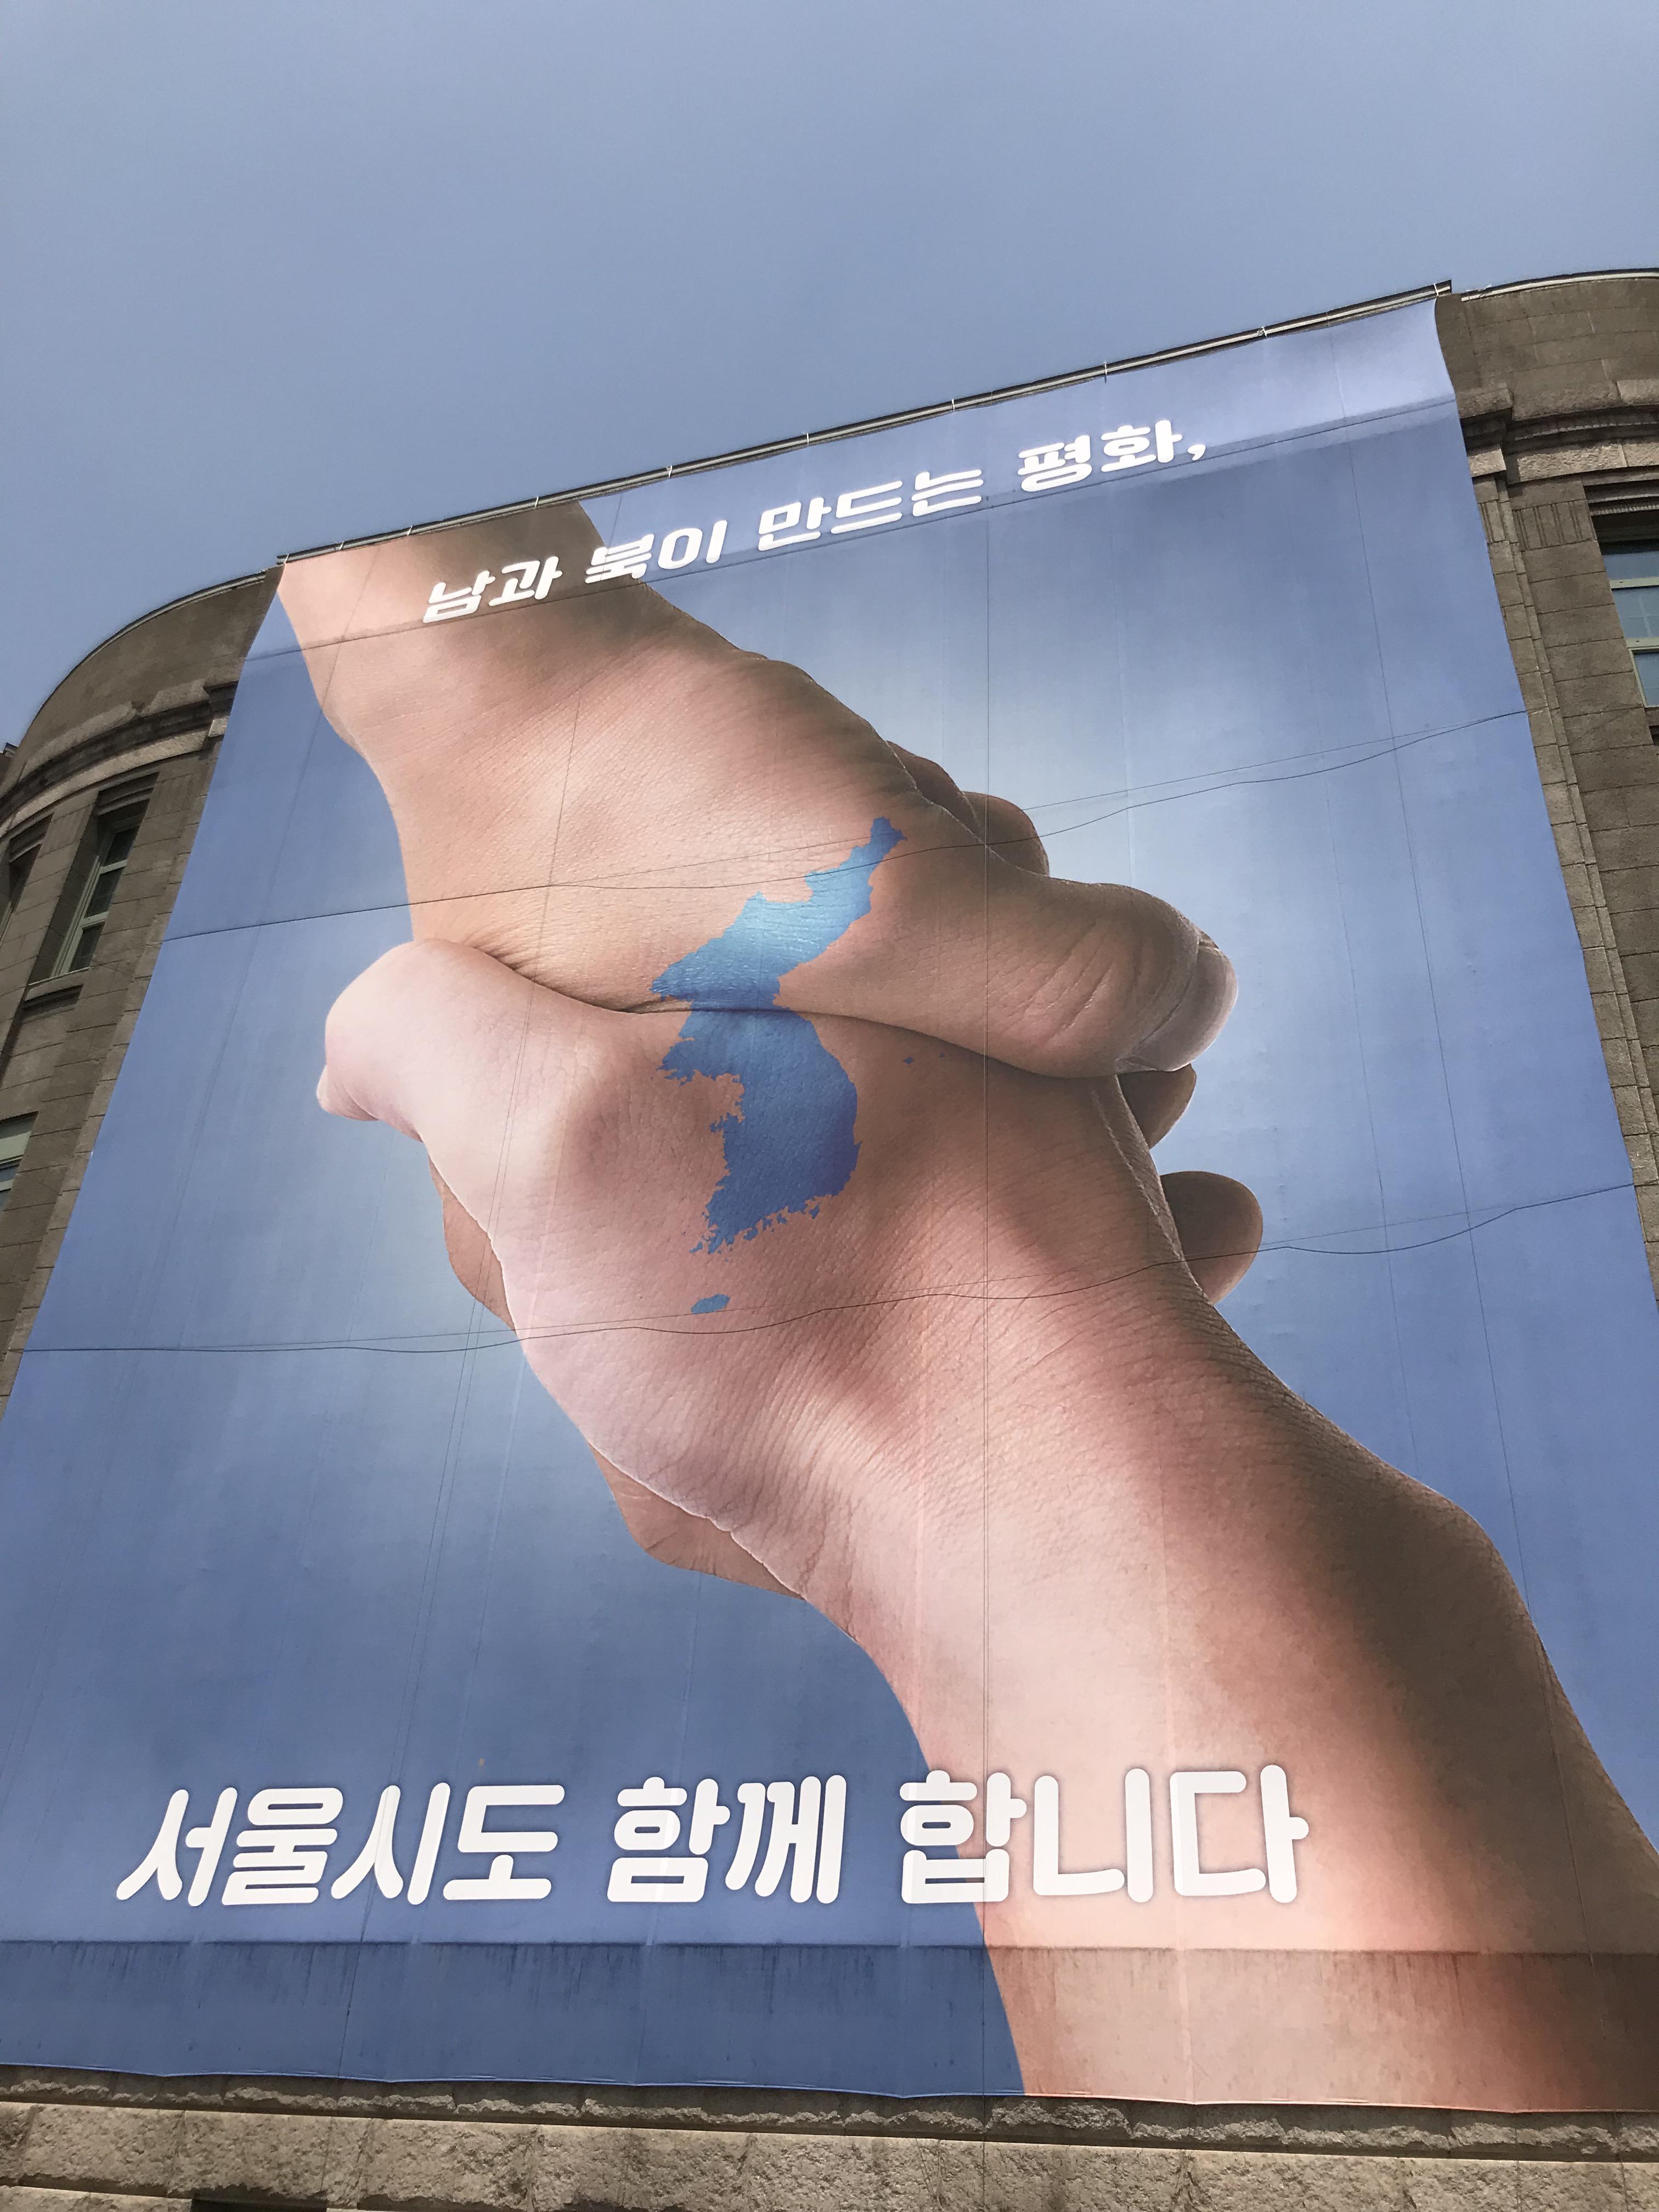 This poster outside Seoul city hall.